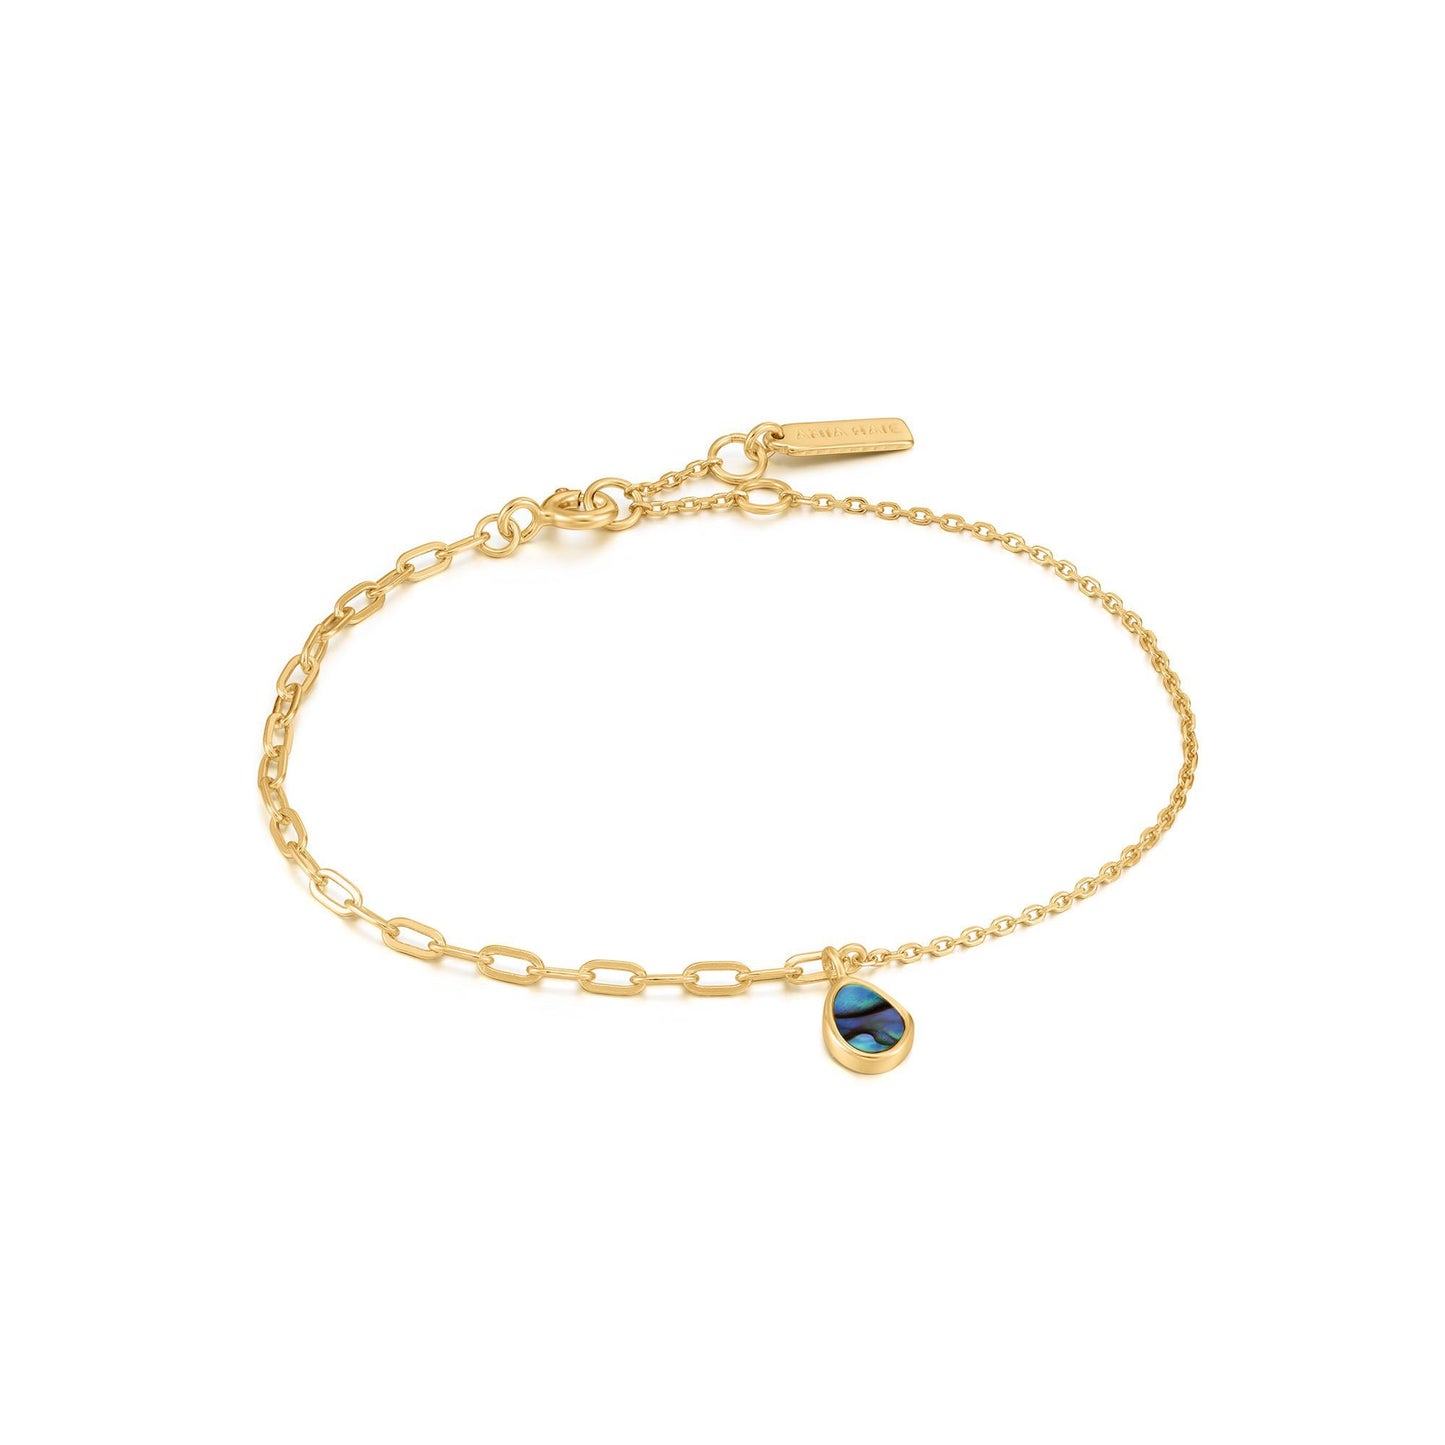 ANIA HAIE ANIA HAIE - Gold Tidal Abalone Mixed Link Bracelet available at The Good Life Boutique